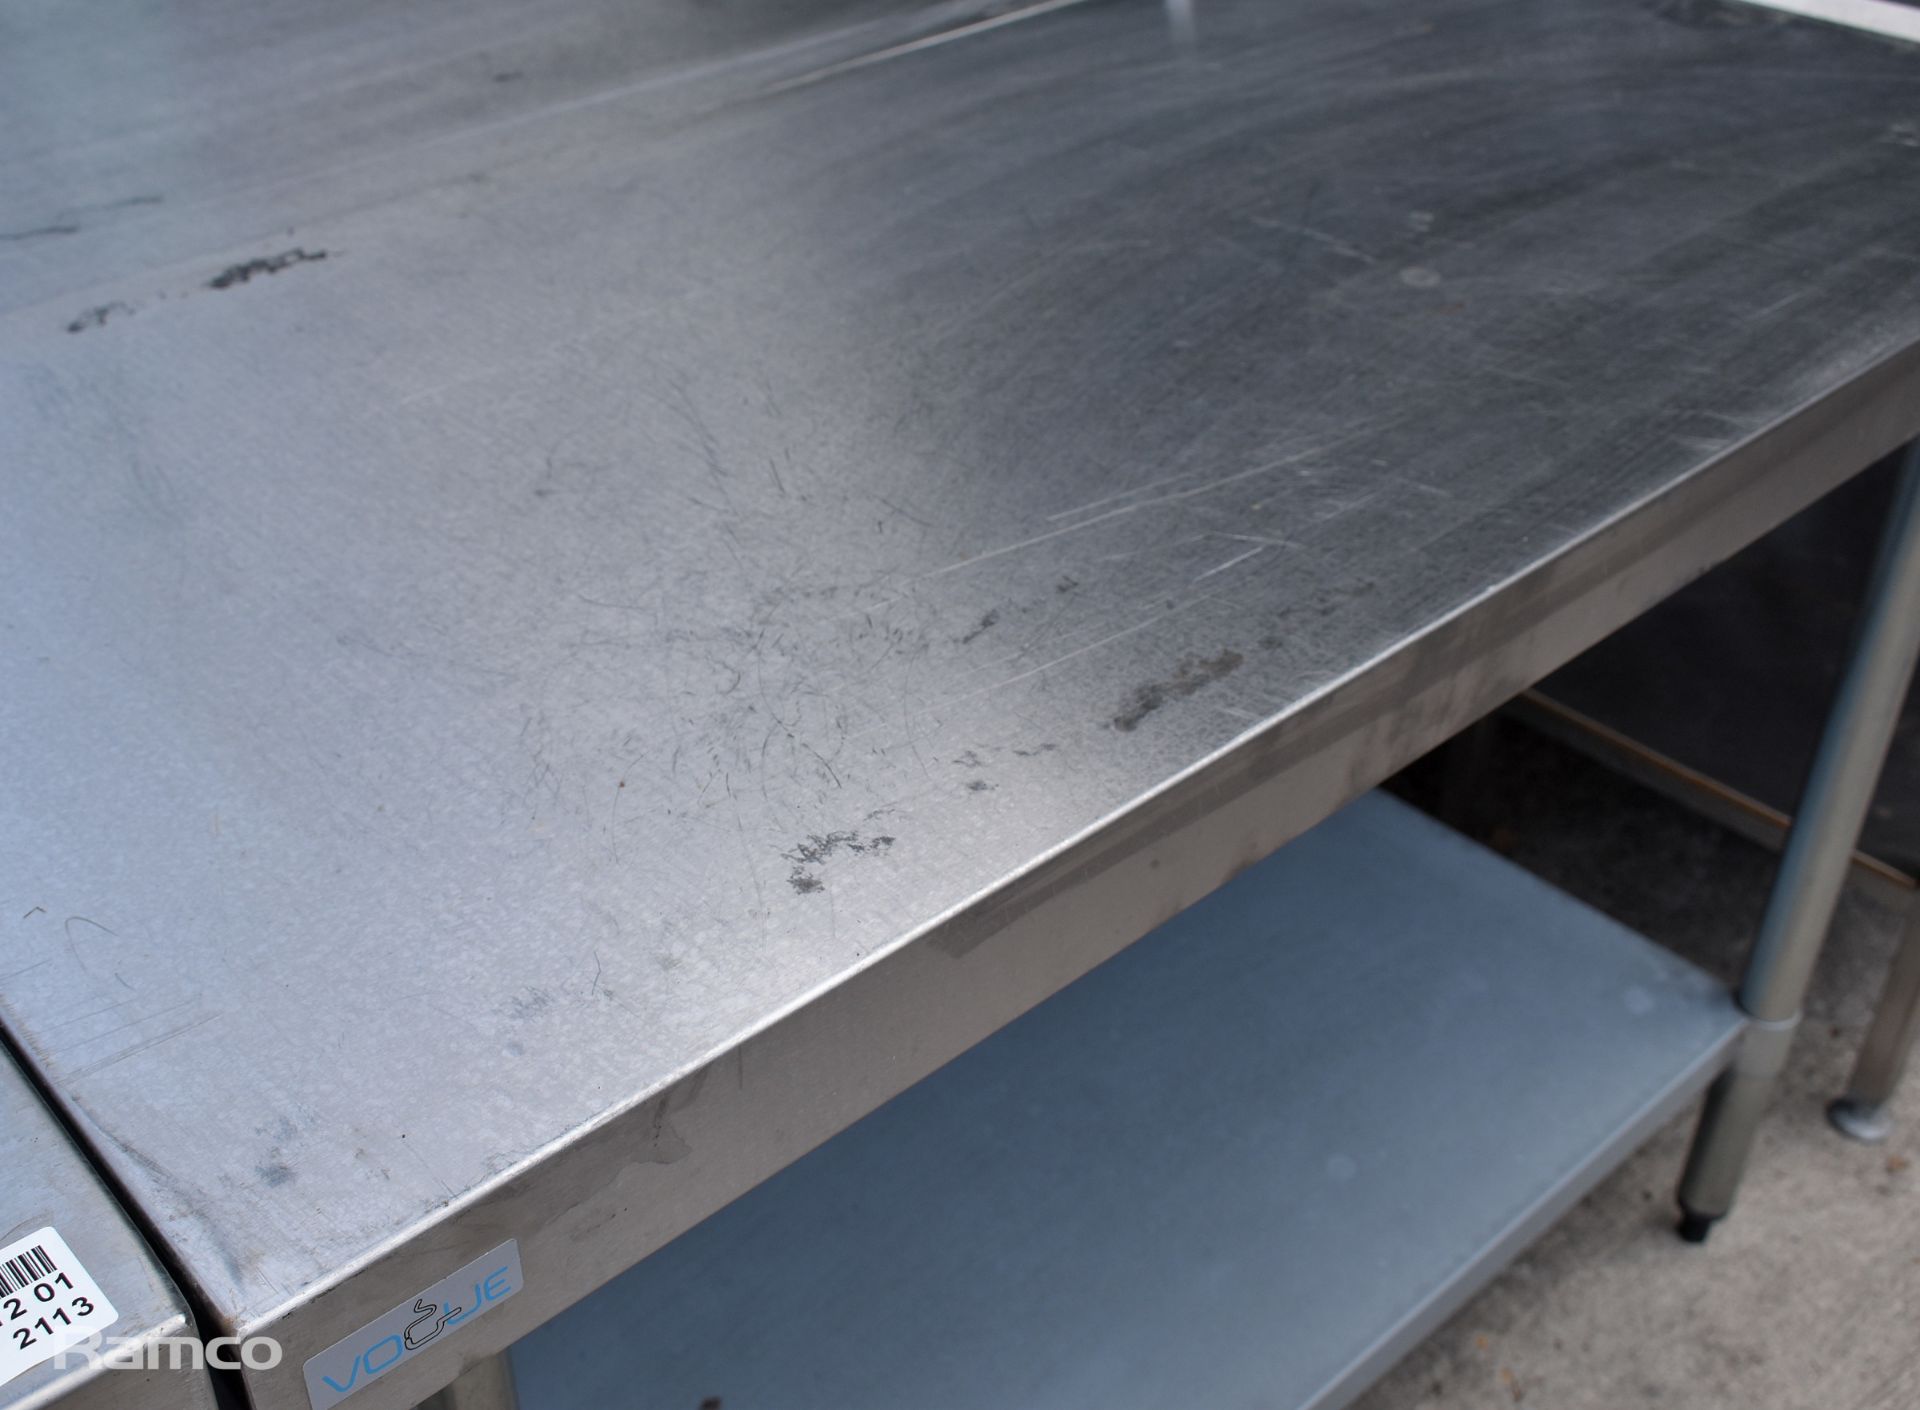 Vogue stainless steel prep table with lower shelf - W 1200 x D 600 x H 900mm - Image 3 of 3